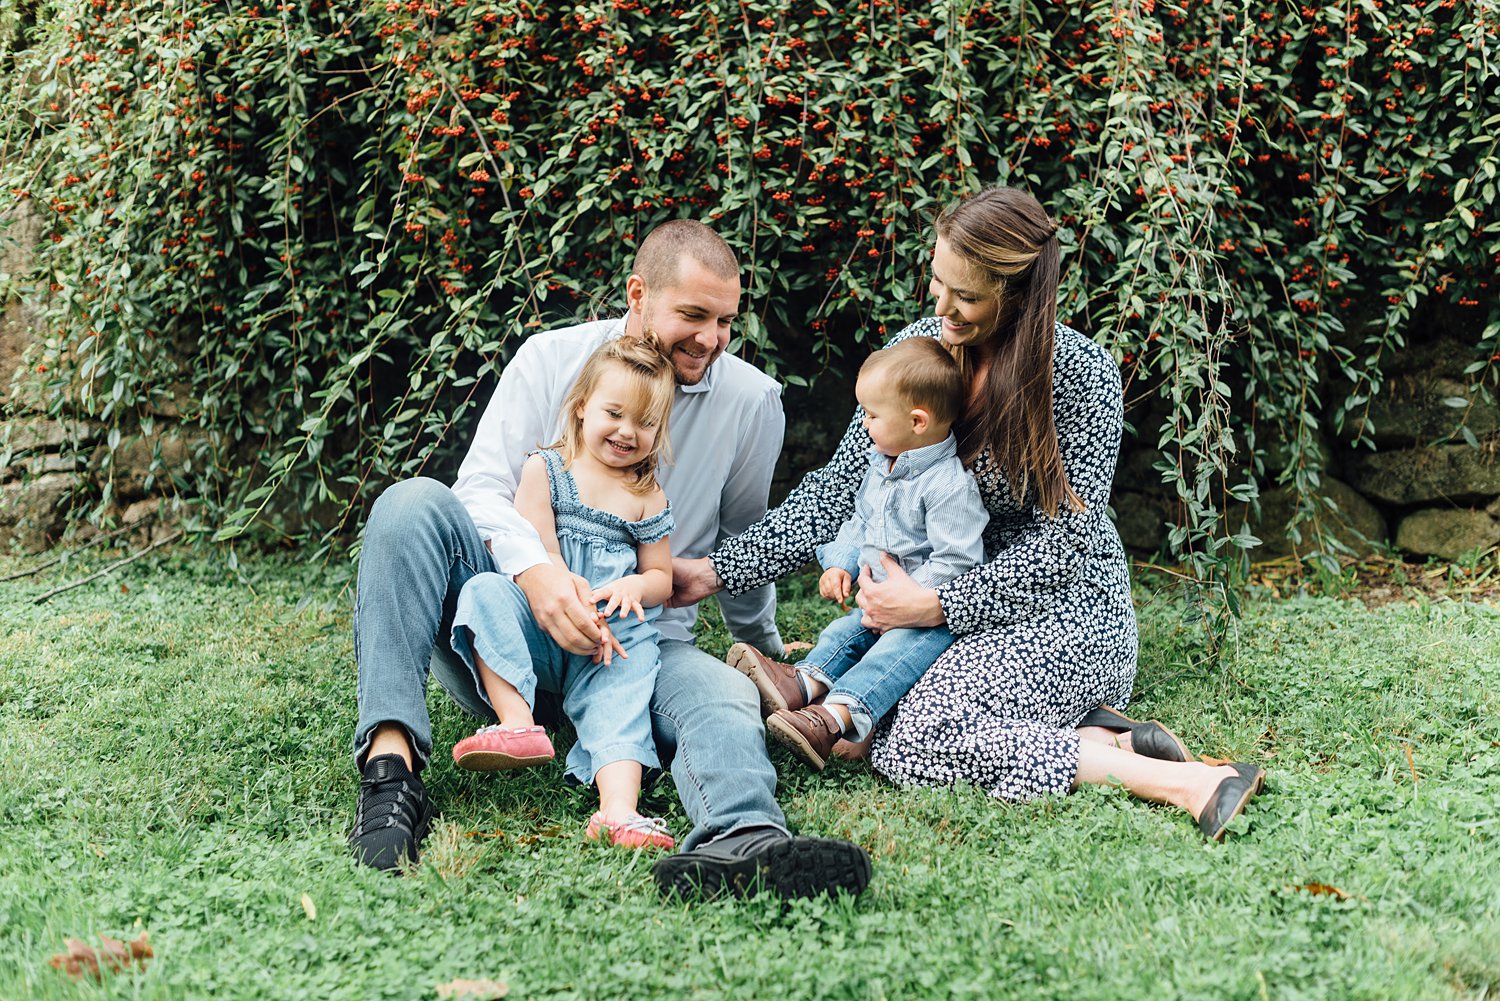 Haines Family - Chester Springs Family Session - Olney Family Photographer - Alison Dunn Photography photo